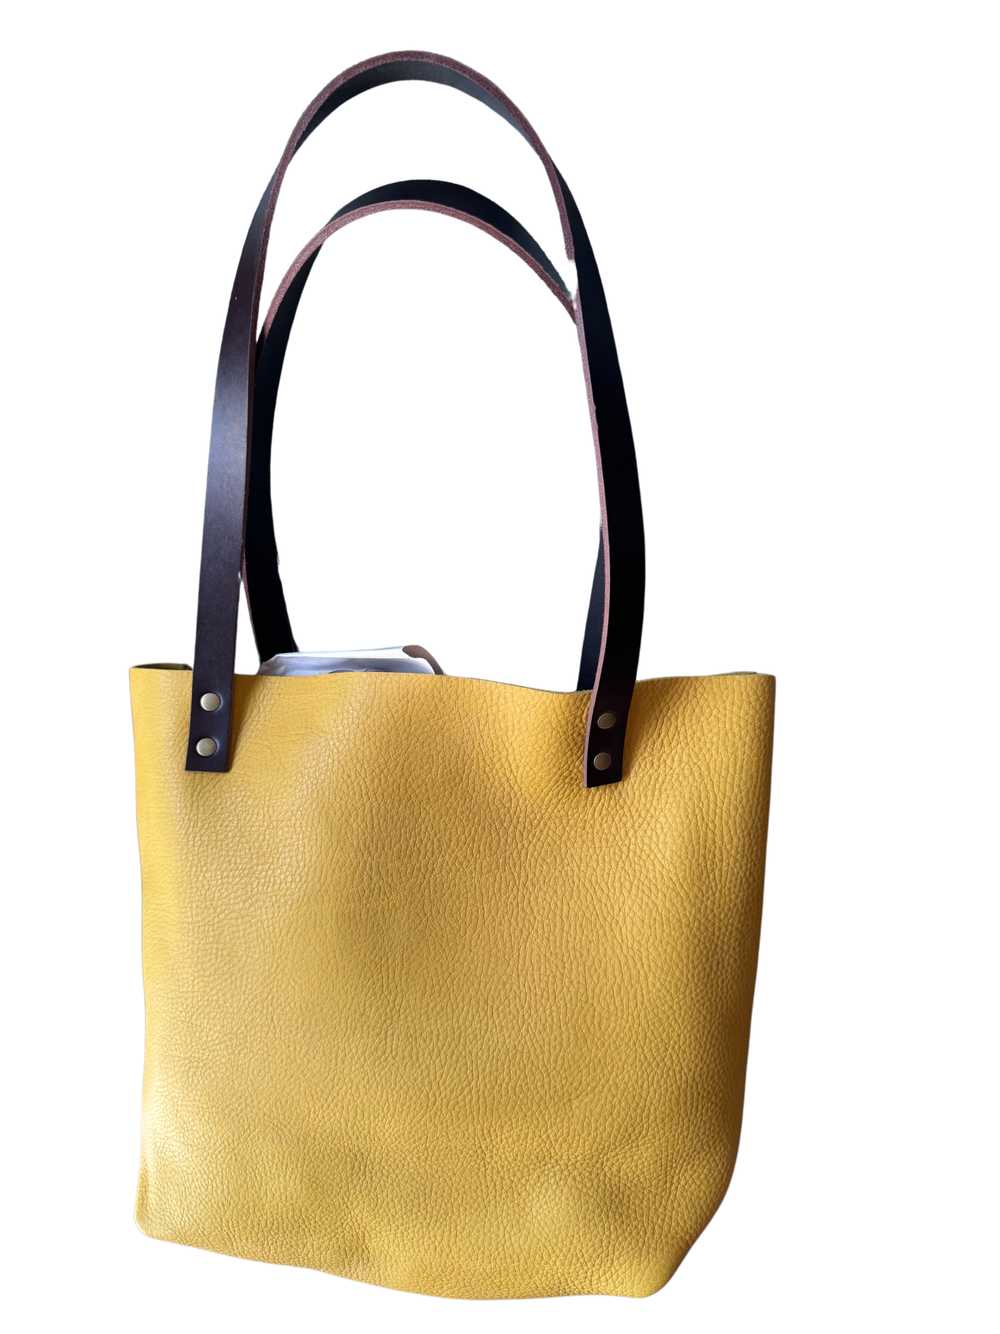 Portland Leather 'Almost Perfect' Leather Tote Bag - image 6